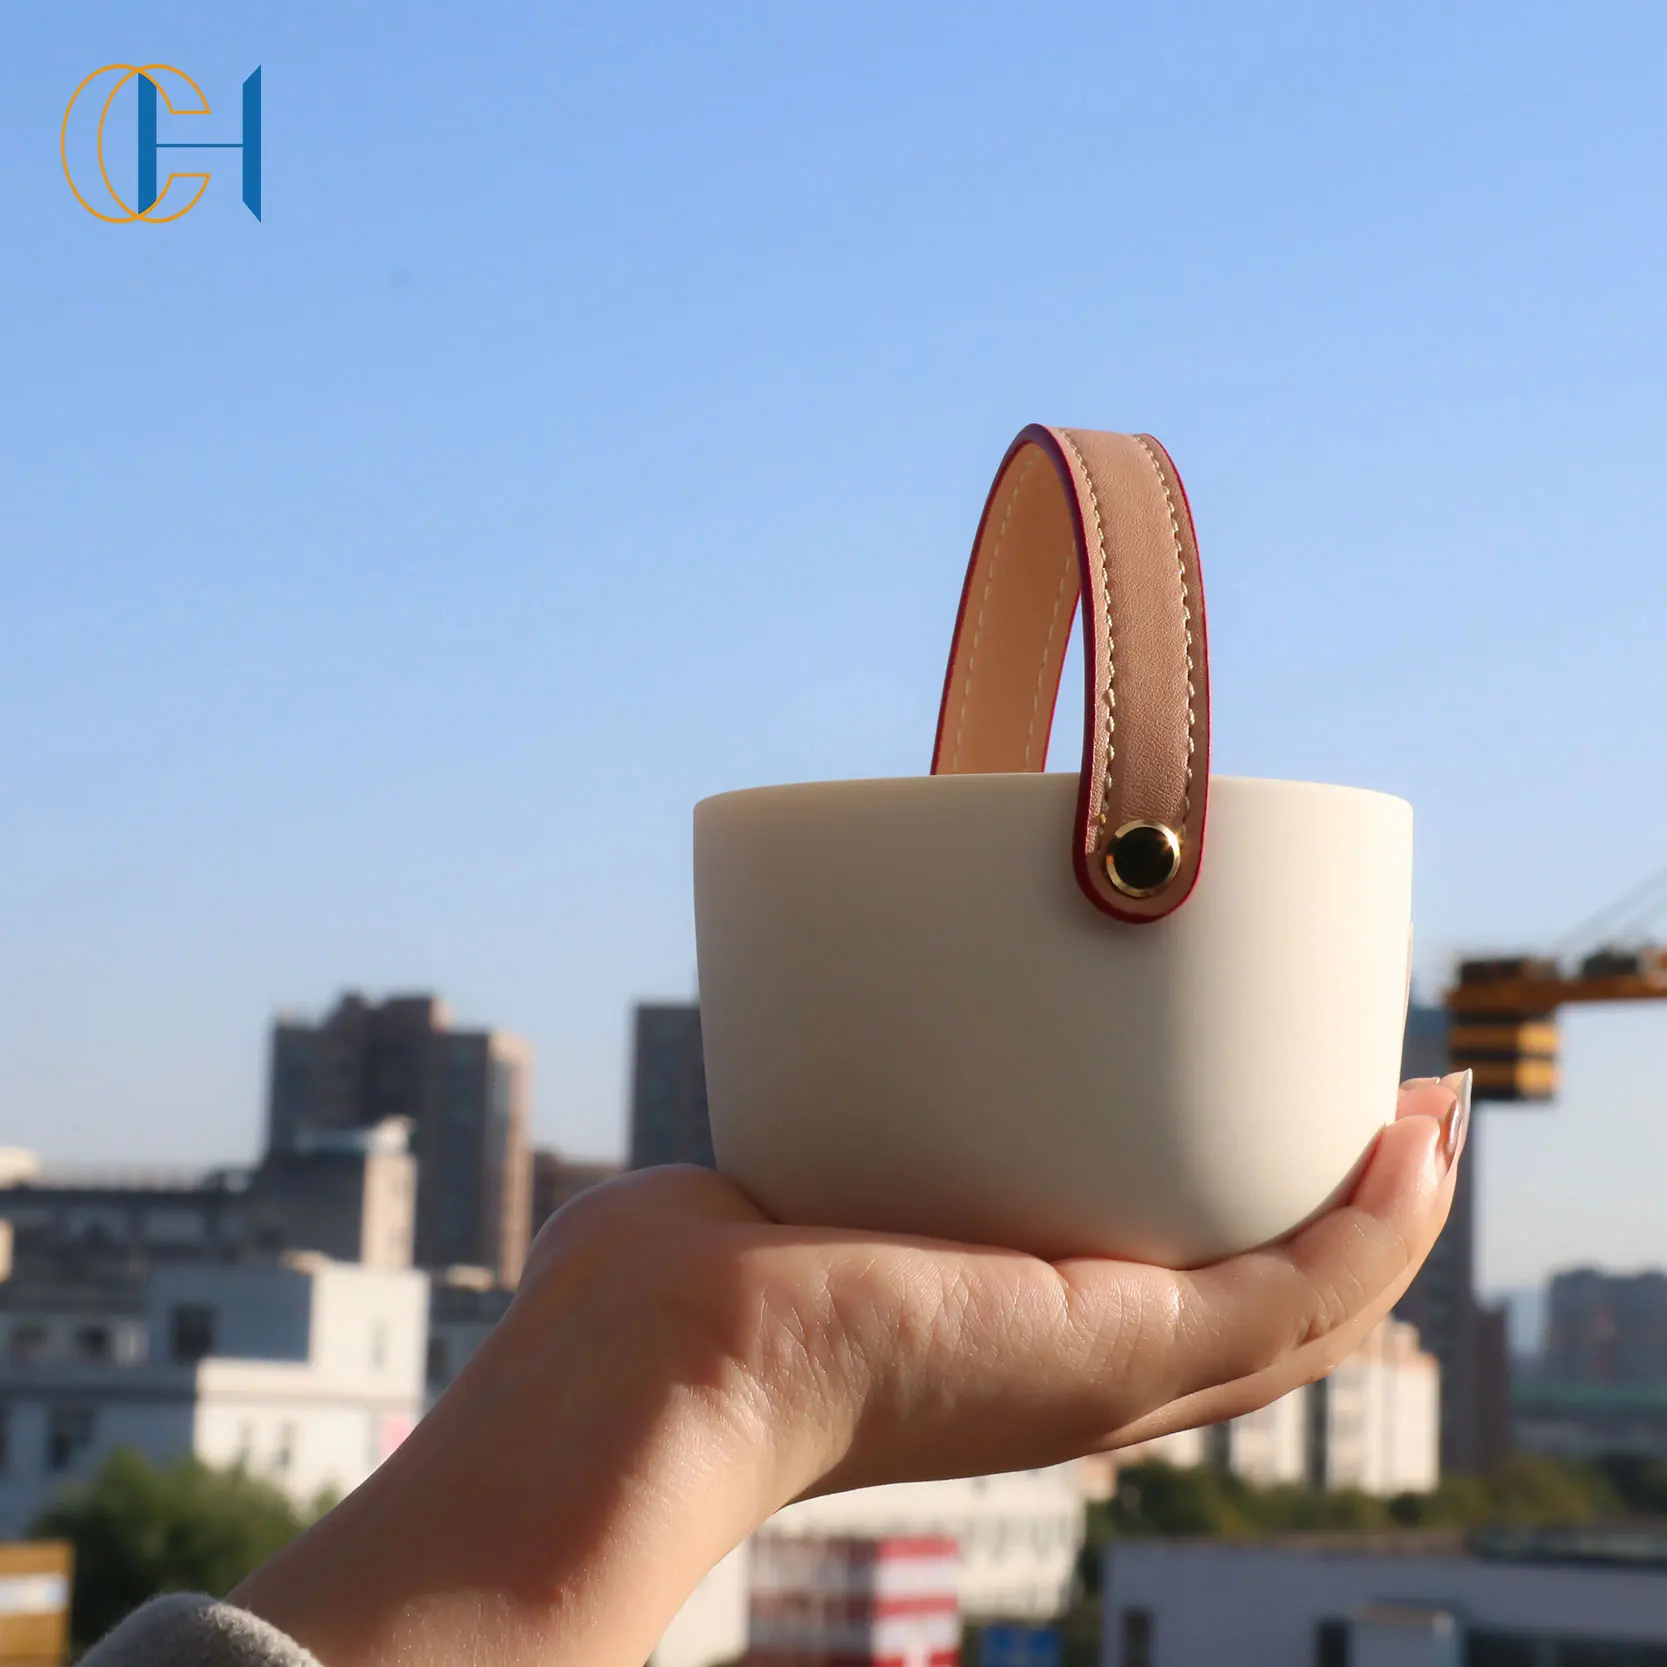 Manufacturer Customized Ceramic Candle With Leather Handle - Buy  Manufacturer Customized Ceramic Candle With Leather Handle Product on